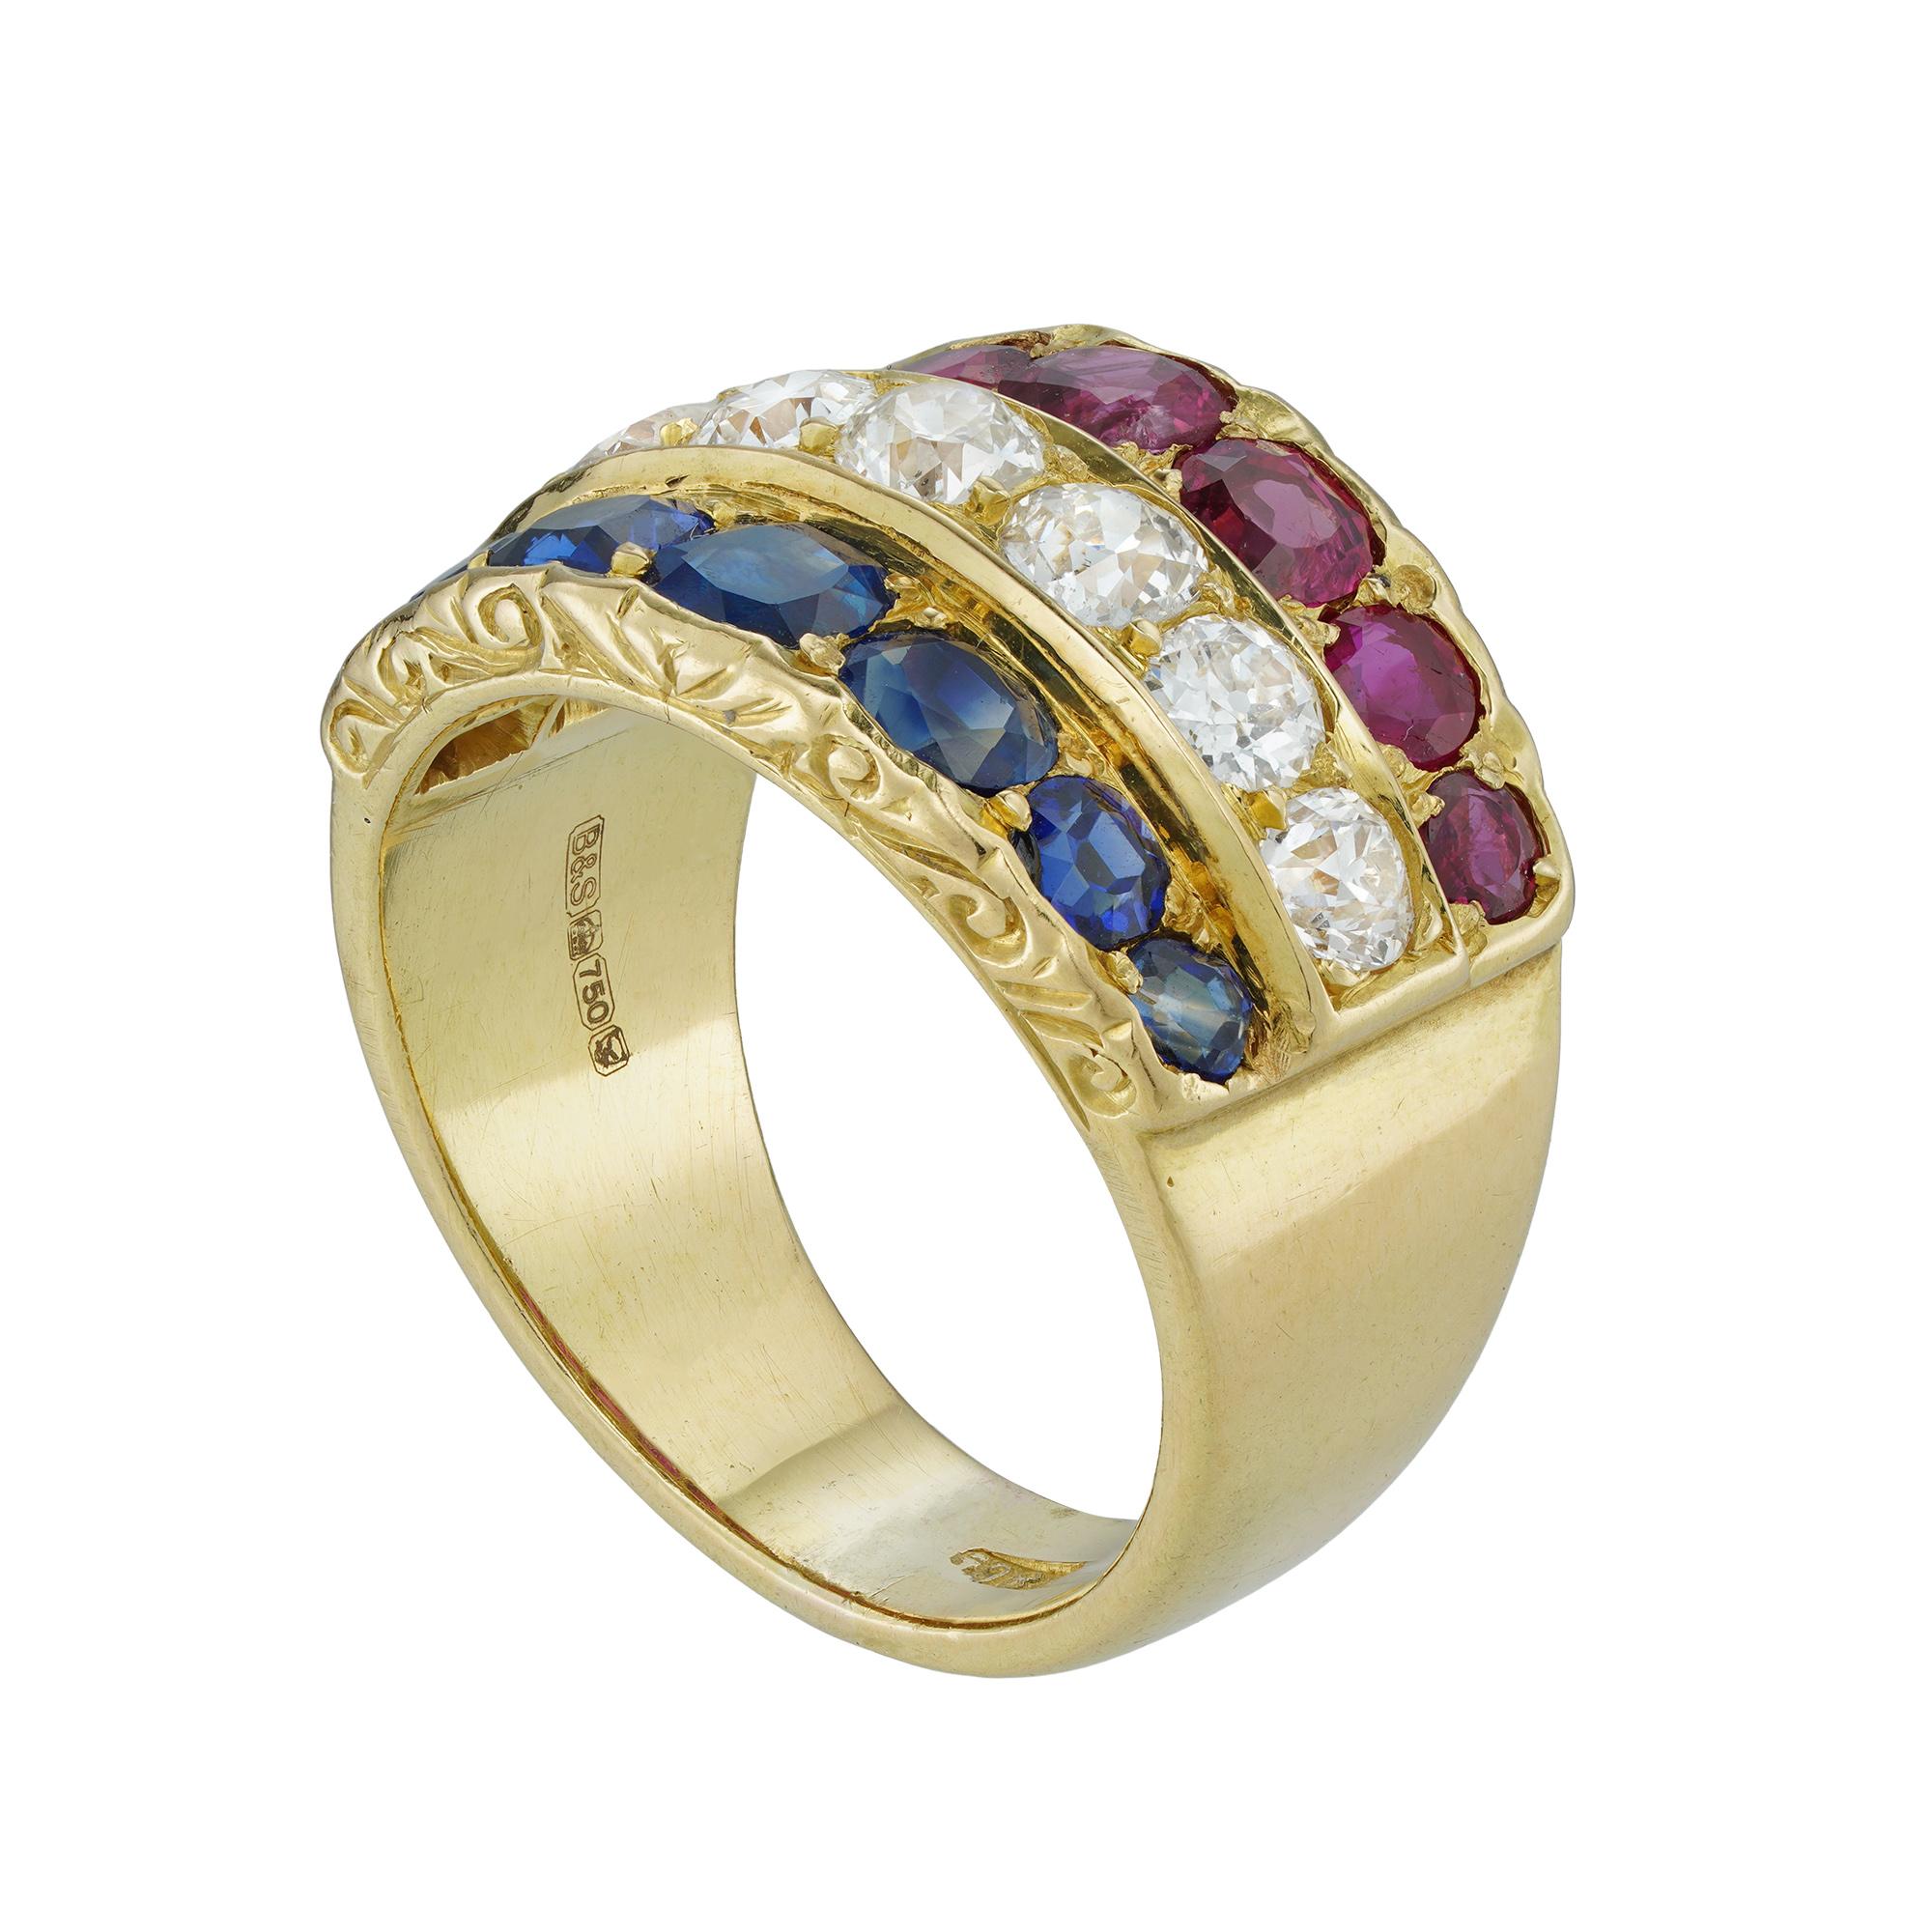 An early 20th century ruby, diamond and sapphire ring, to the centre seven old European-cut diamonds estimated to weigh 1.3 carats in total, set between a row of seven faceted sapphires graduating from the centre and estimated to weigh 1 carat in